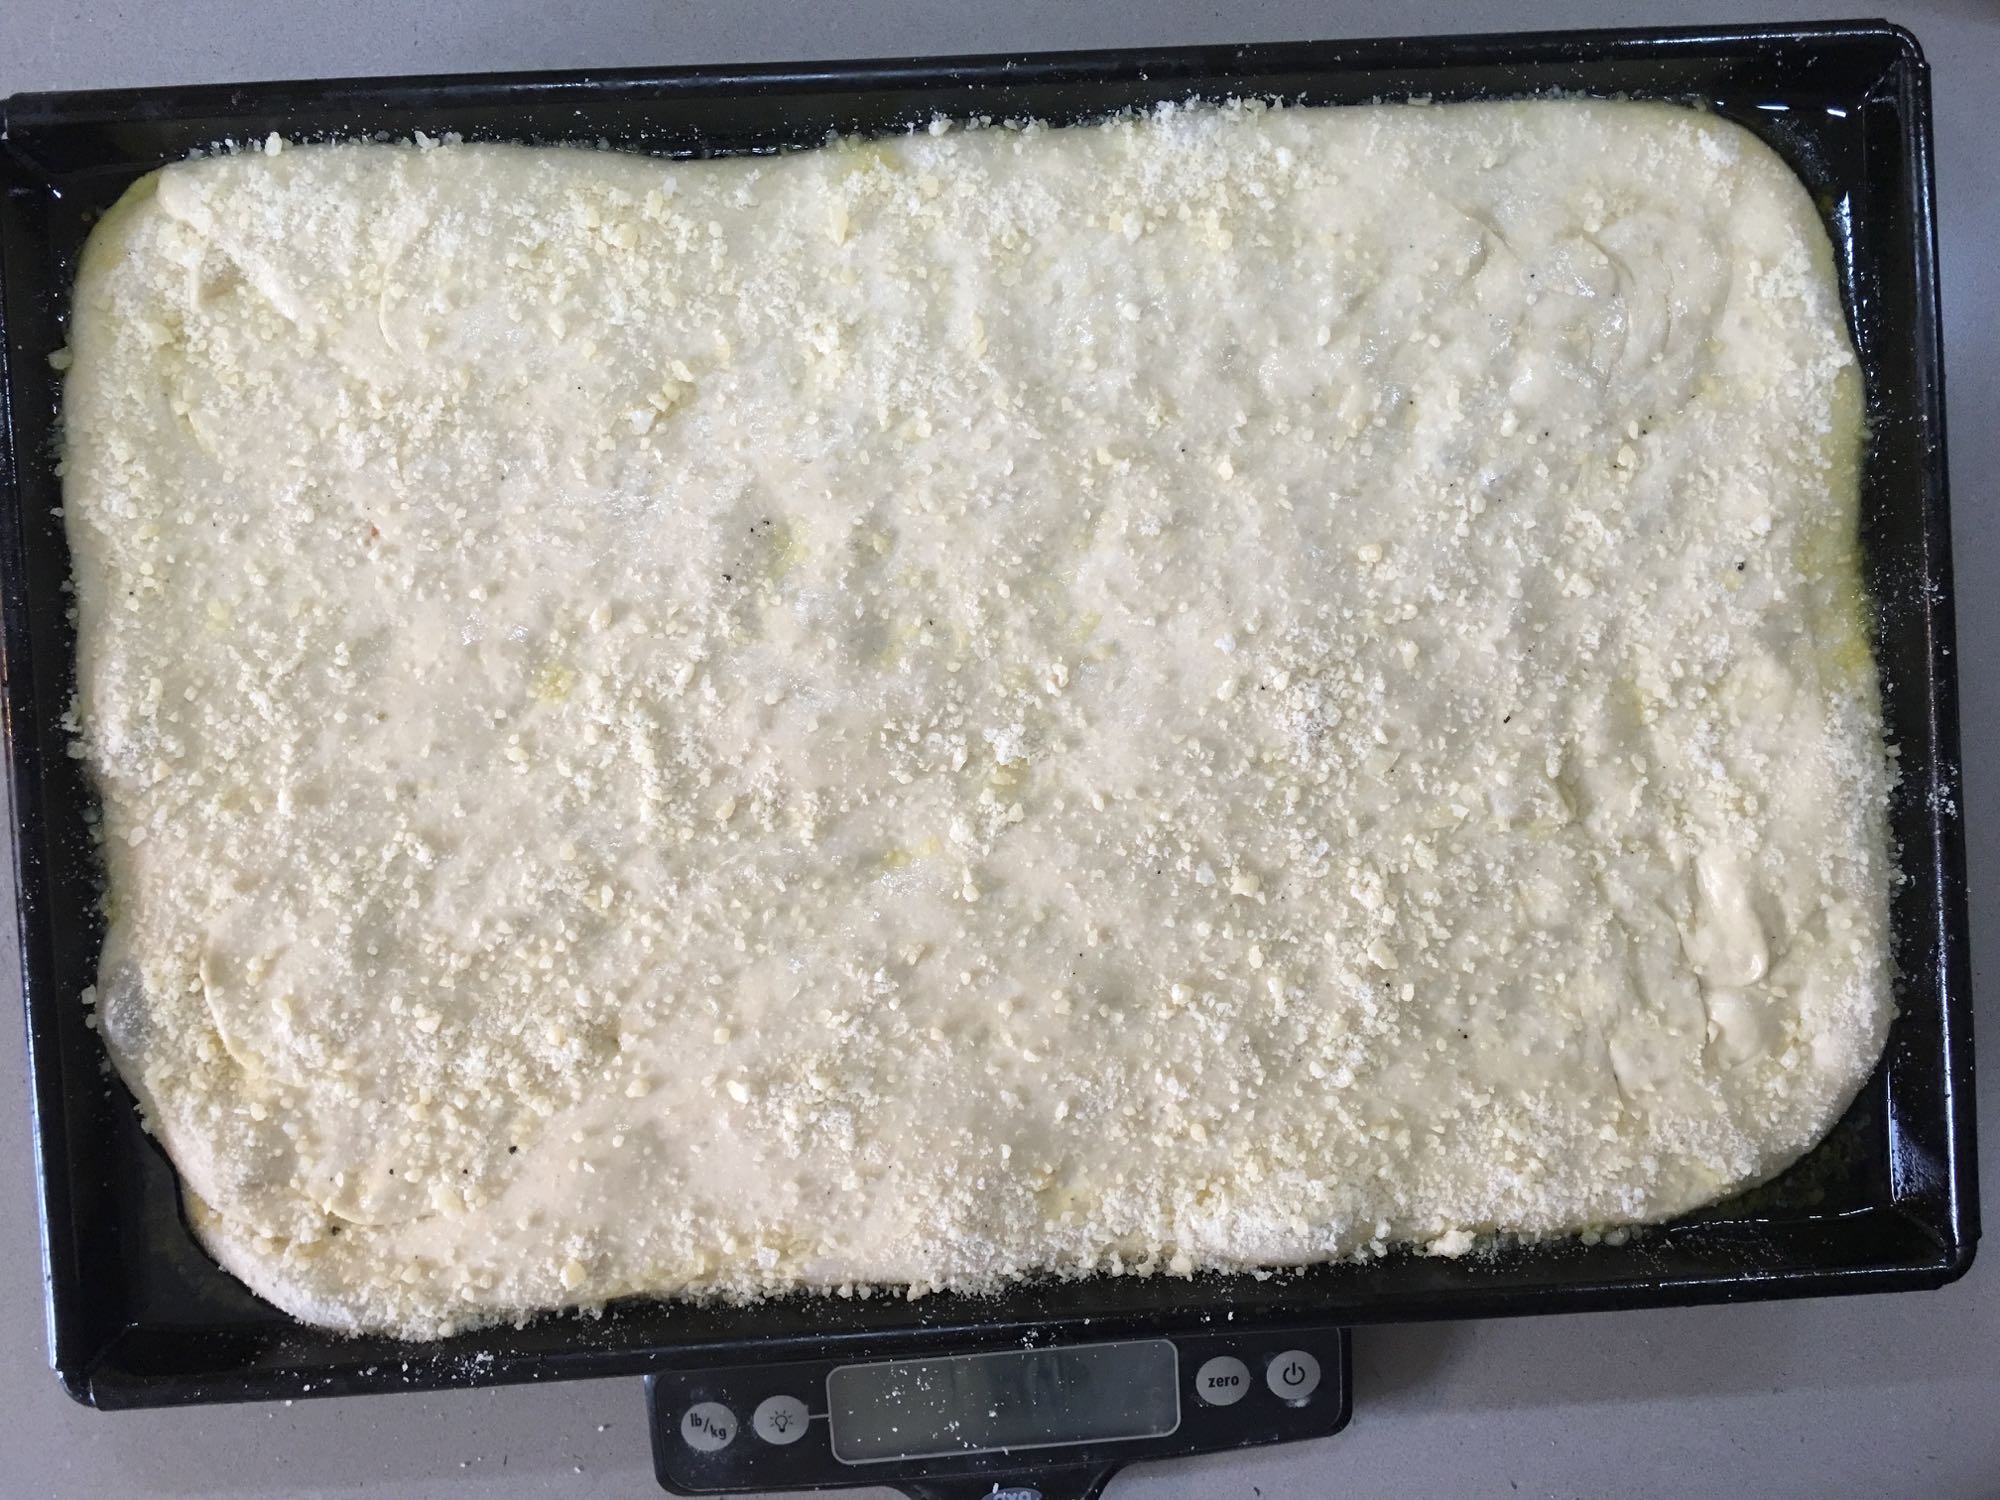 https://www.itspizzanight.com/wp-content/uploads/2021/02/sunday-square-dough-with-parm.jpg